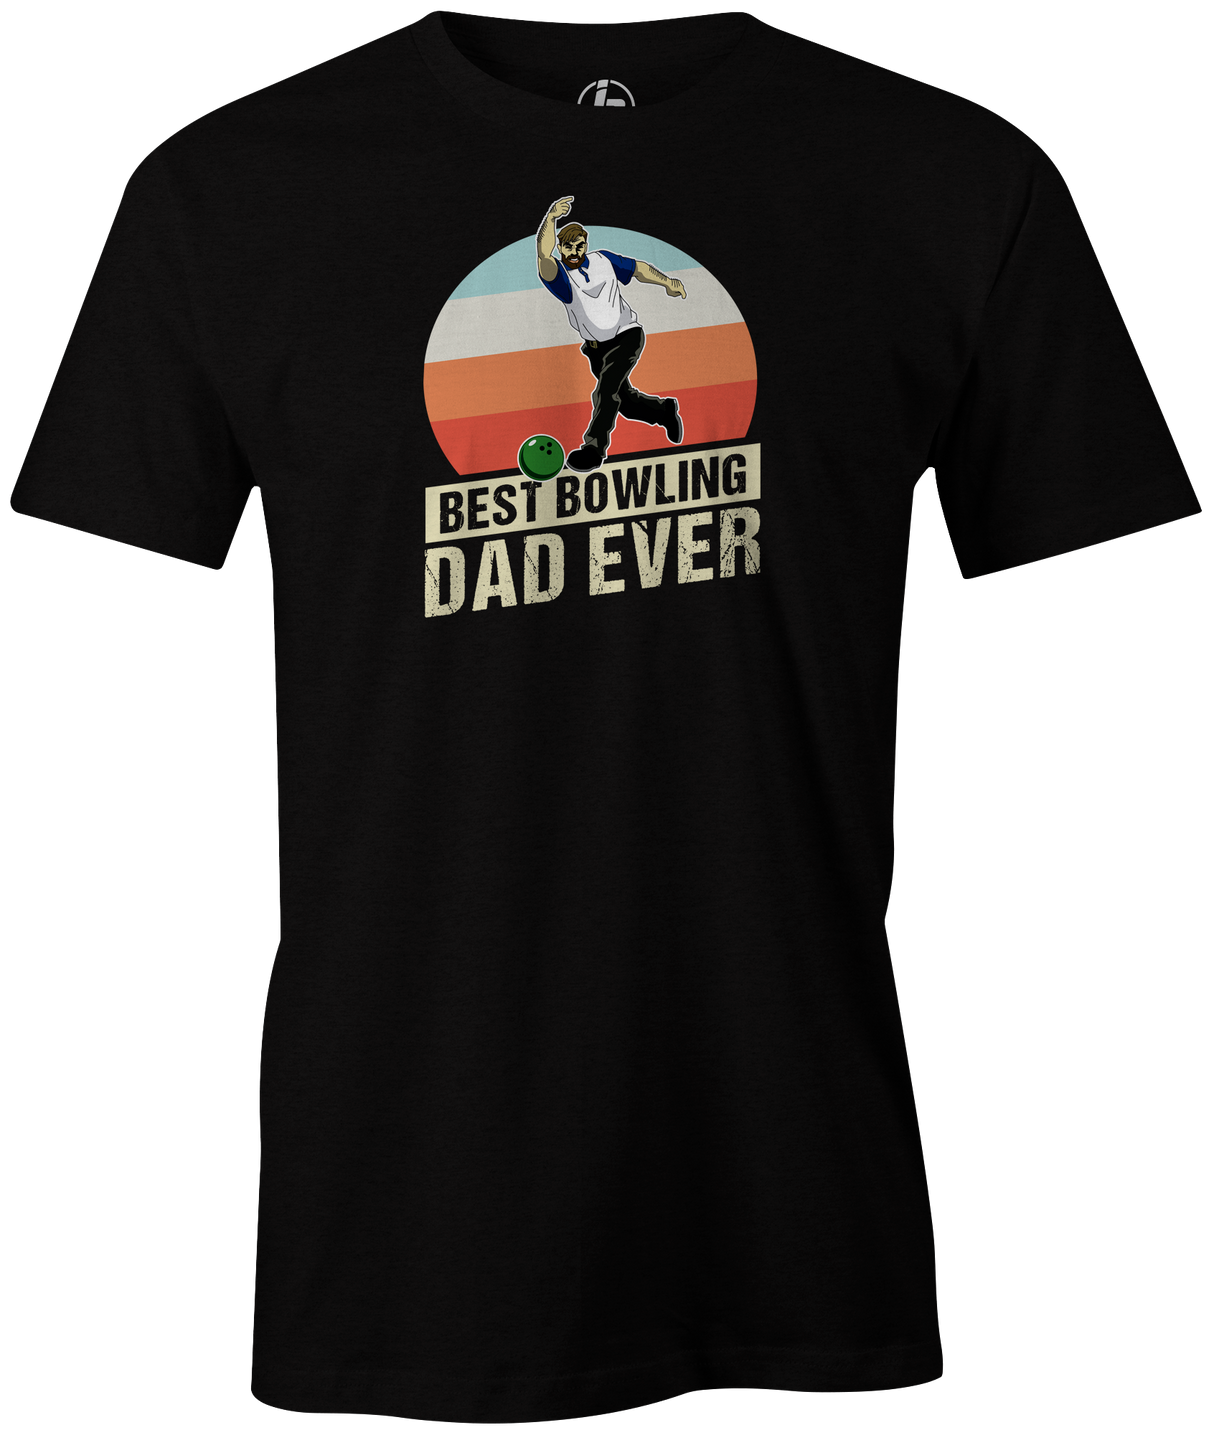 Best bowling Dad Ever Men's Bowling shirt, black, tee, tee-shirt, tee shirt, apparel, merch, cool, funny, vintage, father's day, gift, present, cheap, discount, free shipping, goat.